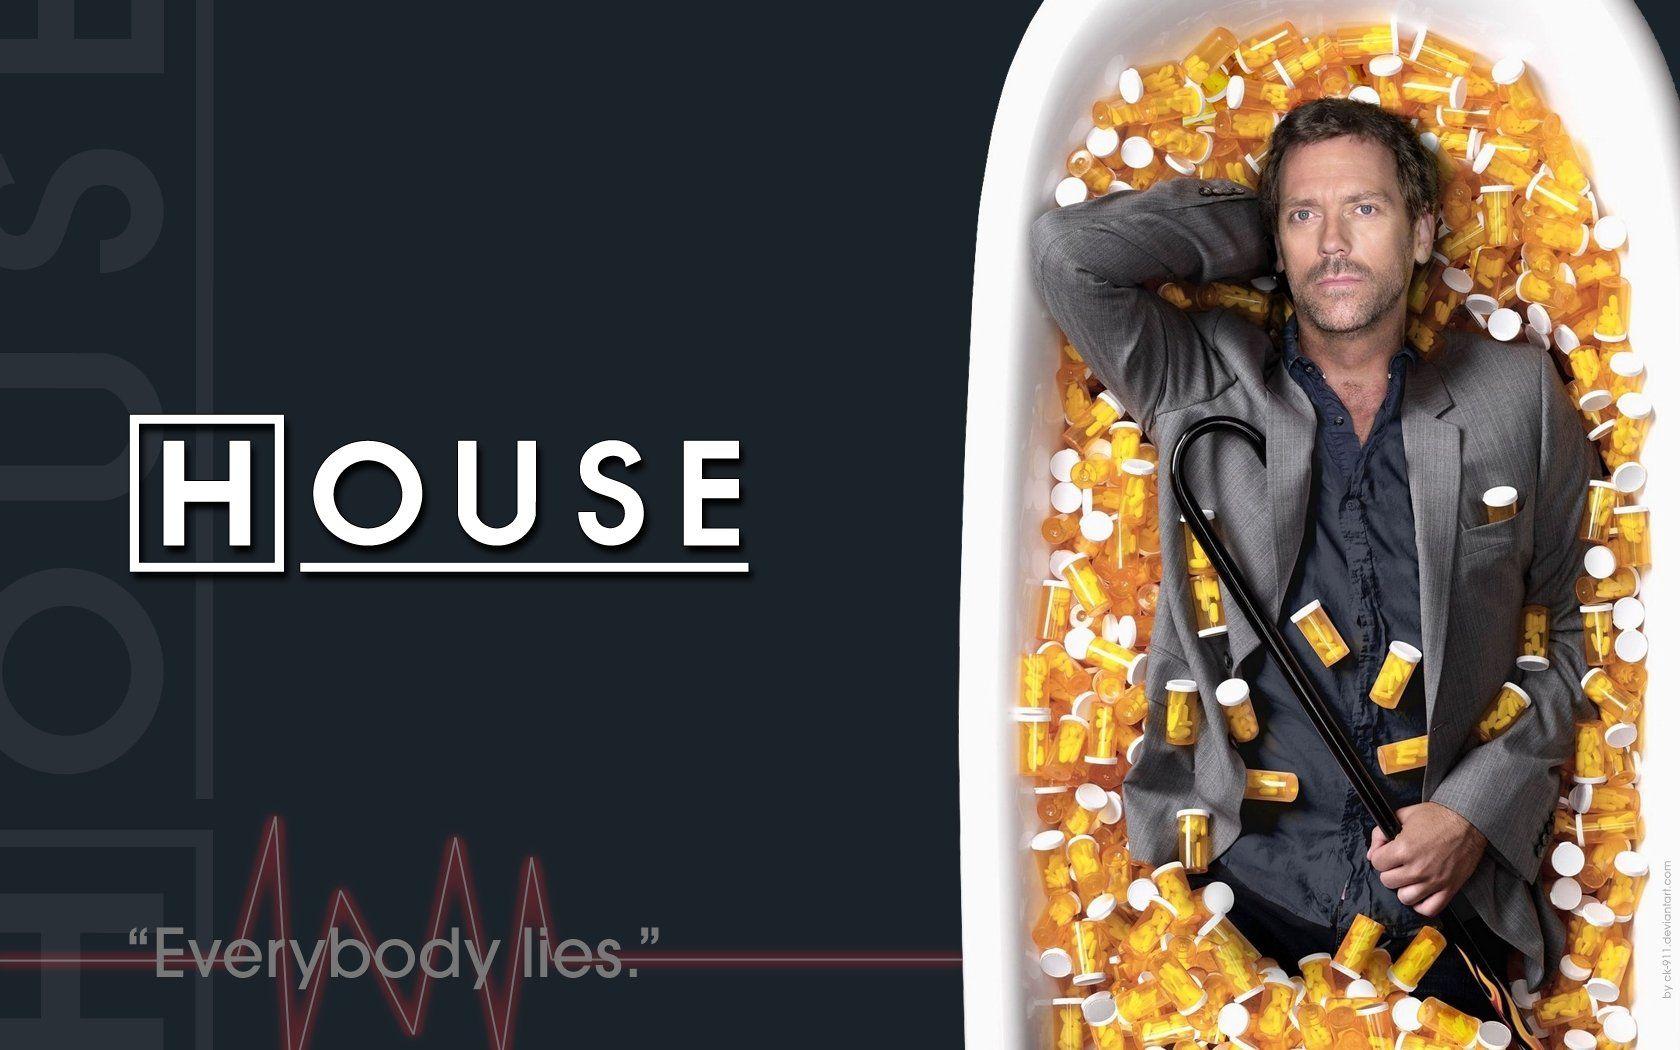  house md wallpaper hd HD Photos  Wallpapers 55 Images